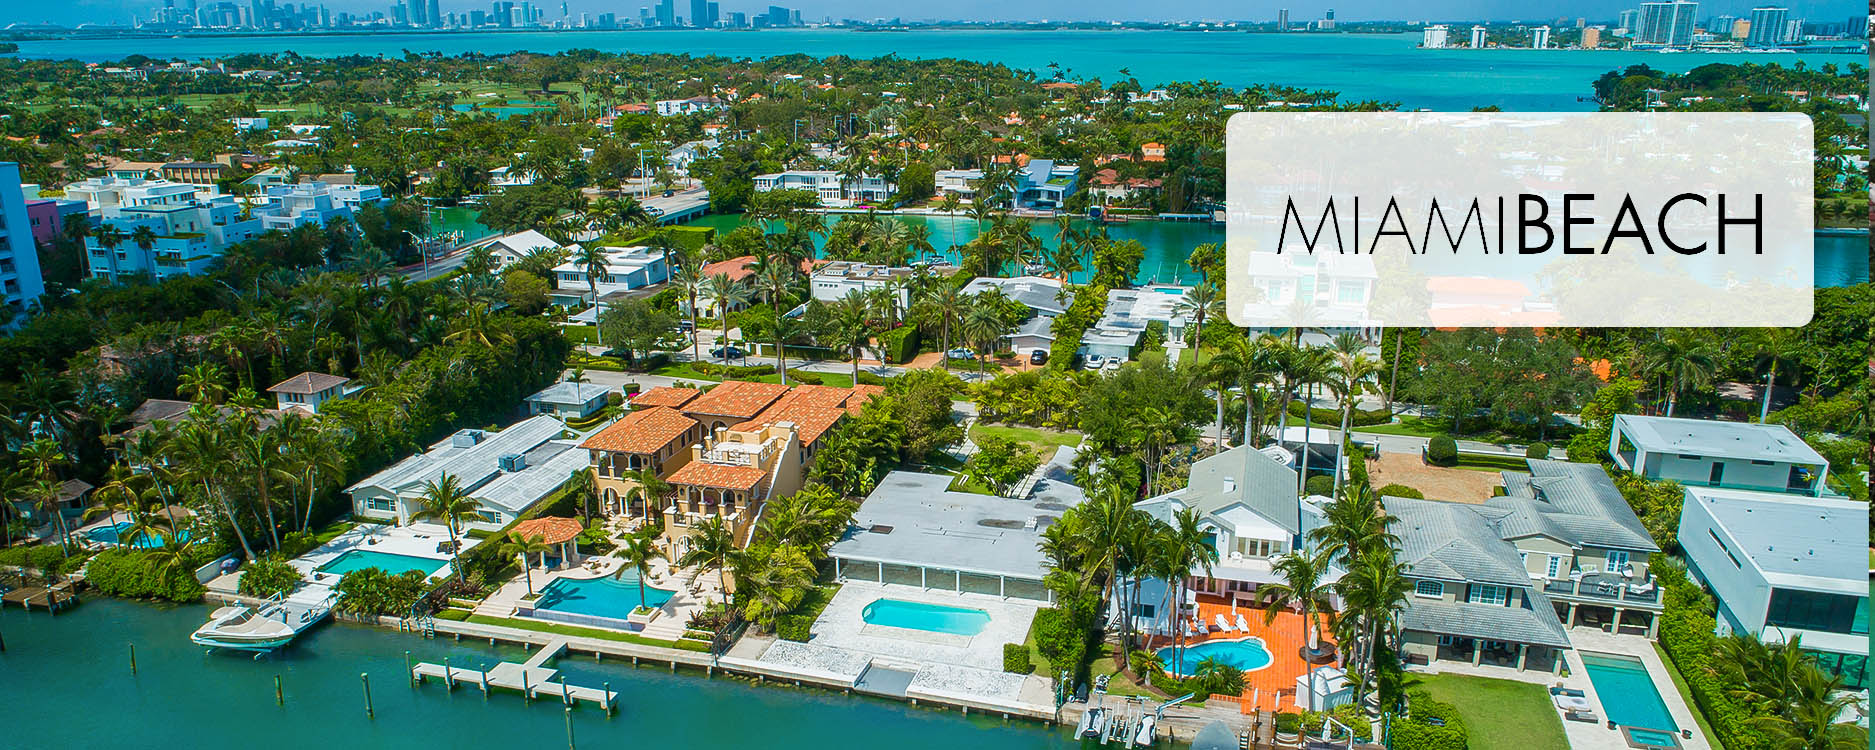 Miami Beach Waterfront Homes & Mansions